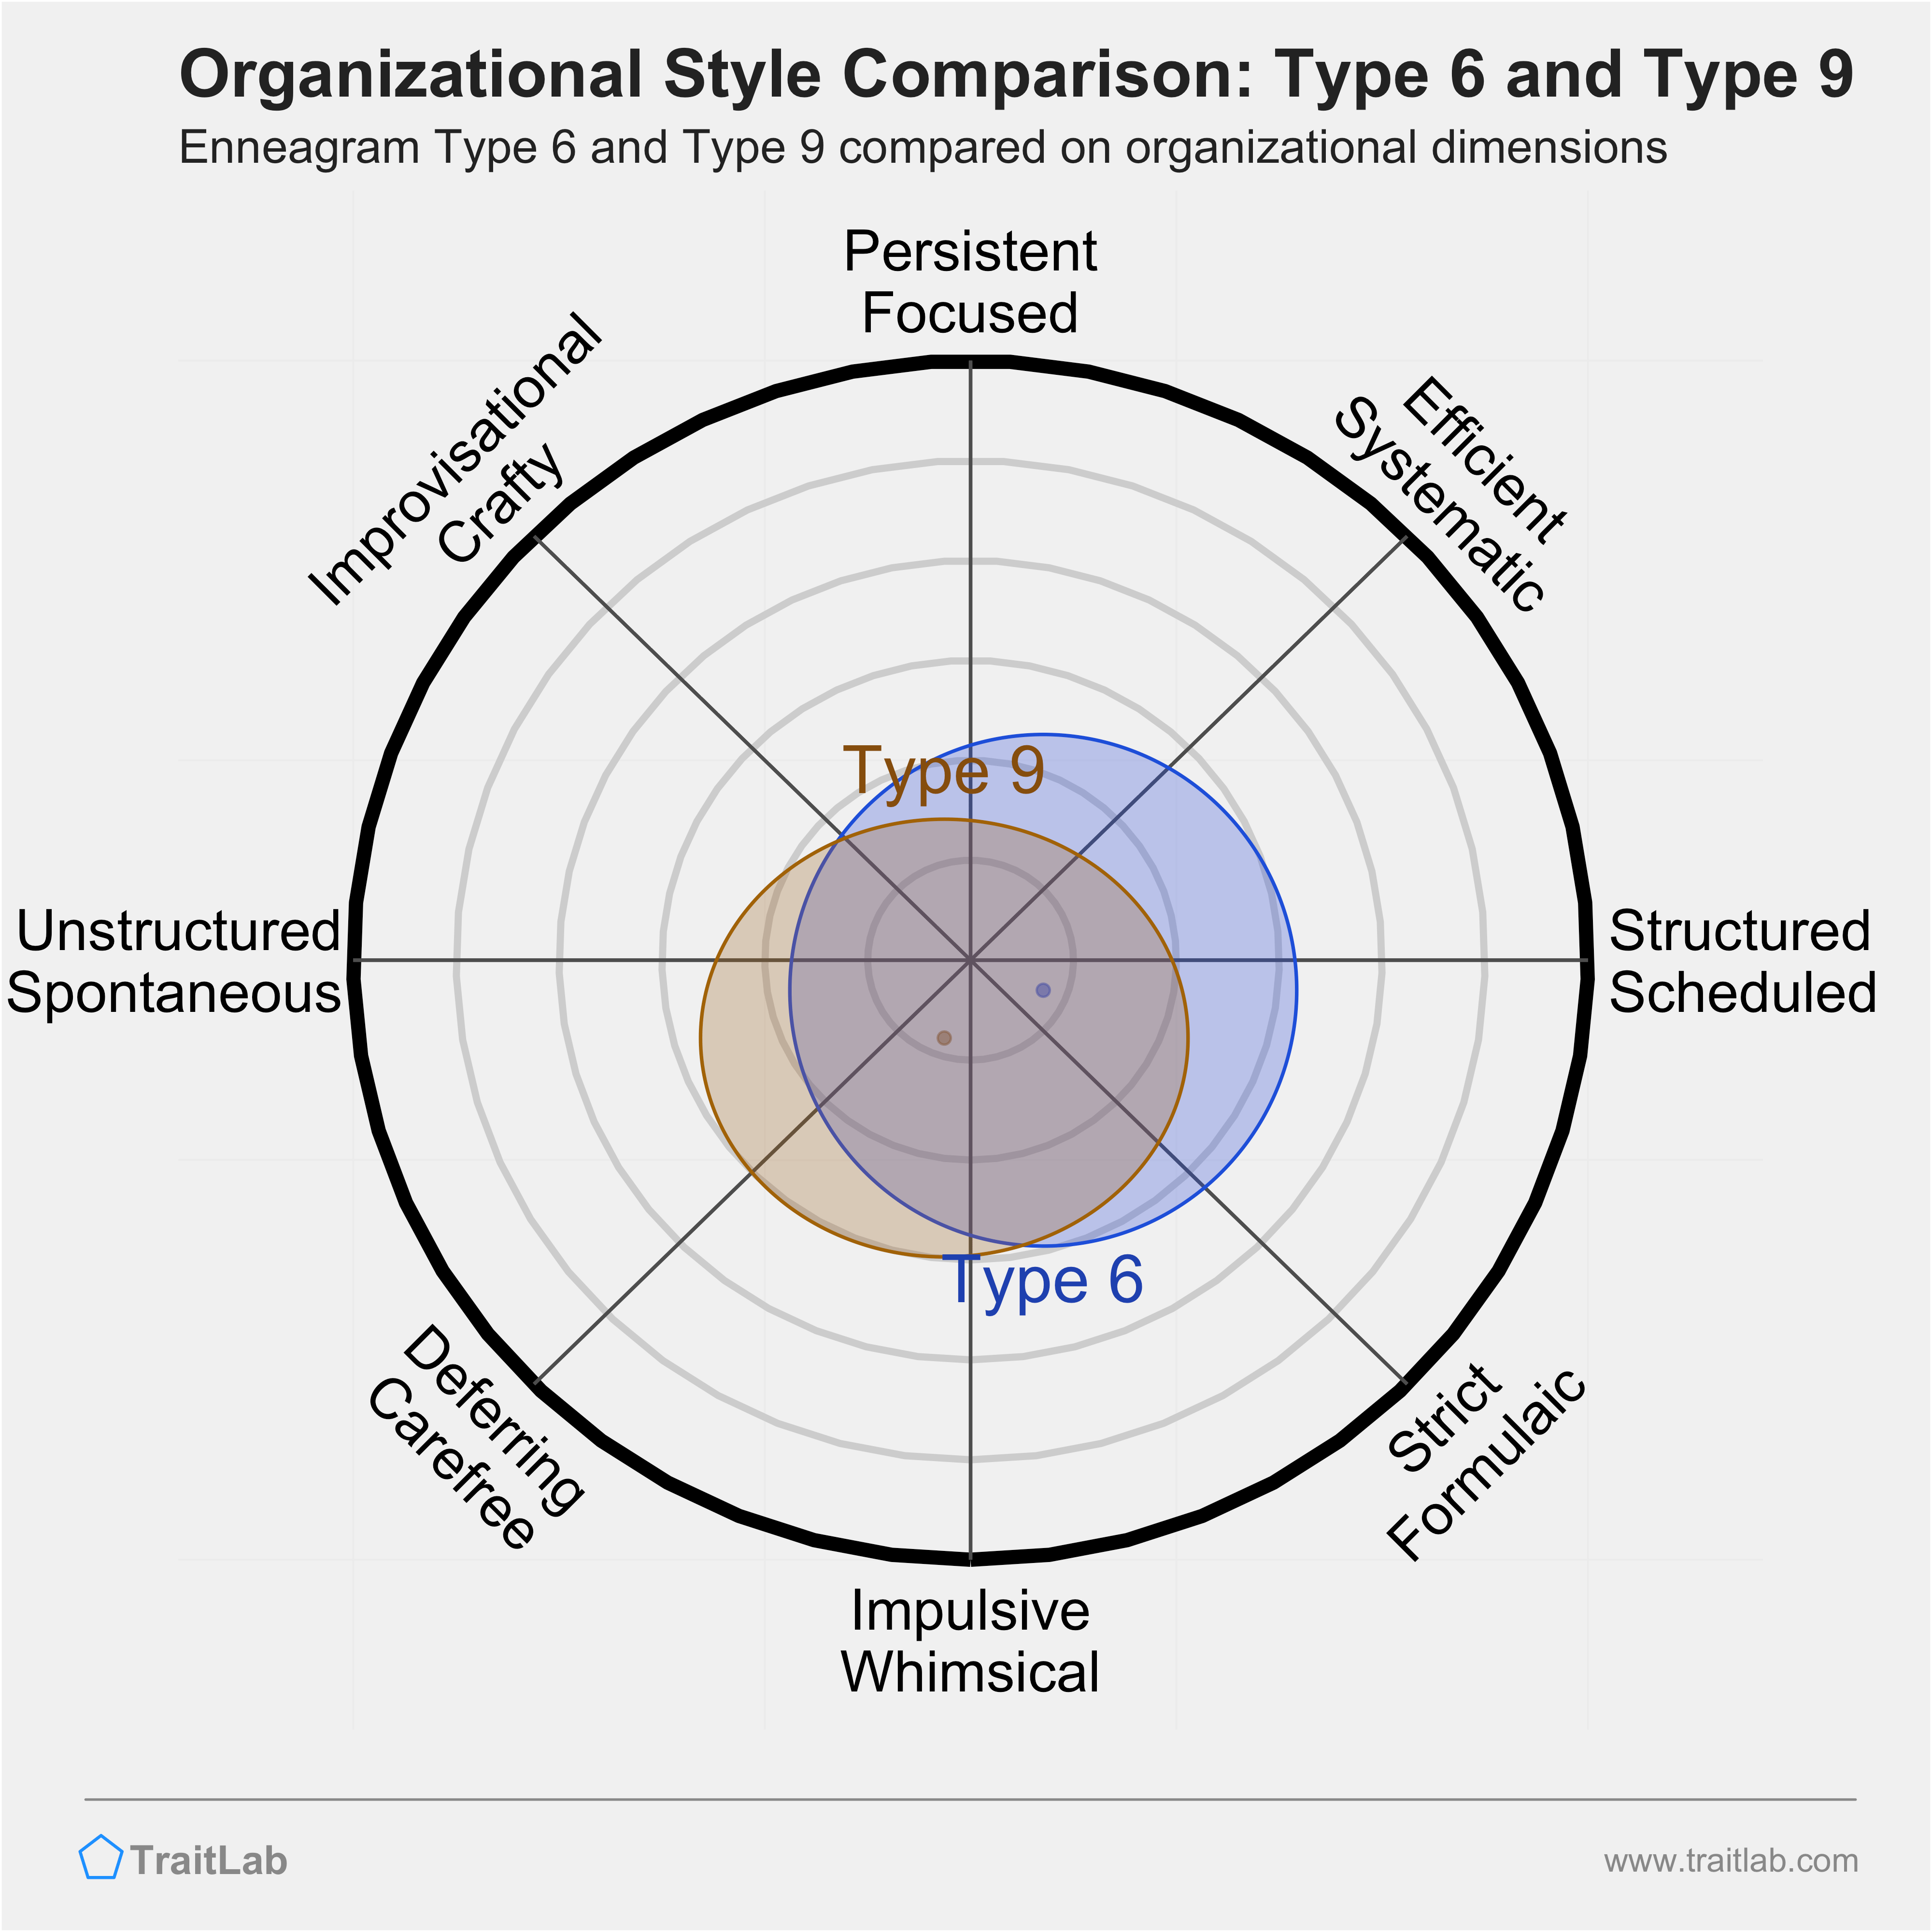 Type 6 and Type 9 comparison across organizational dimensions